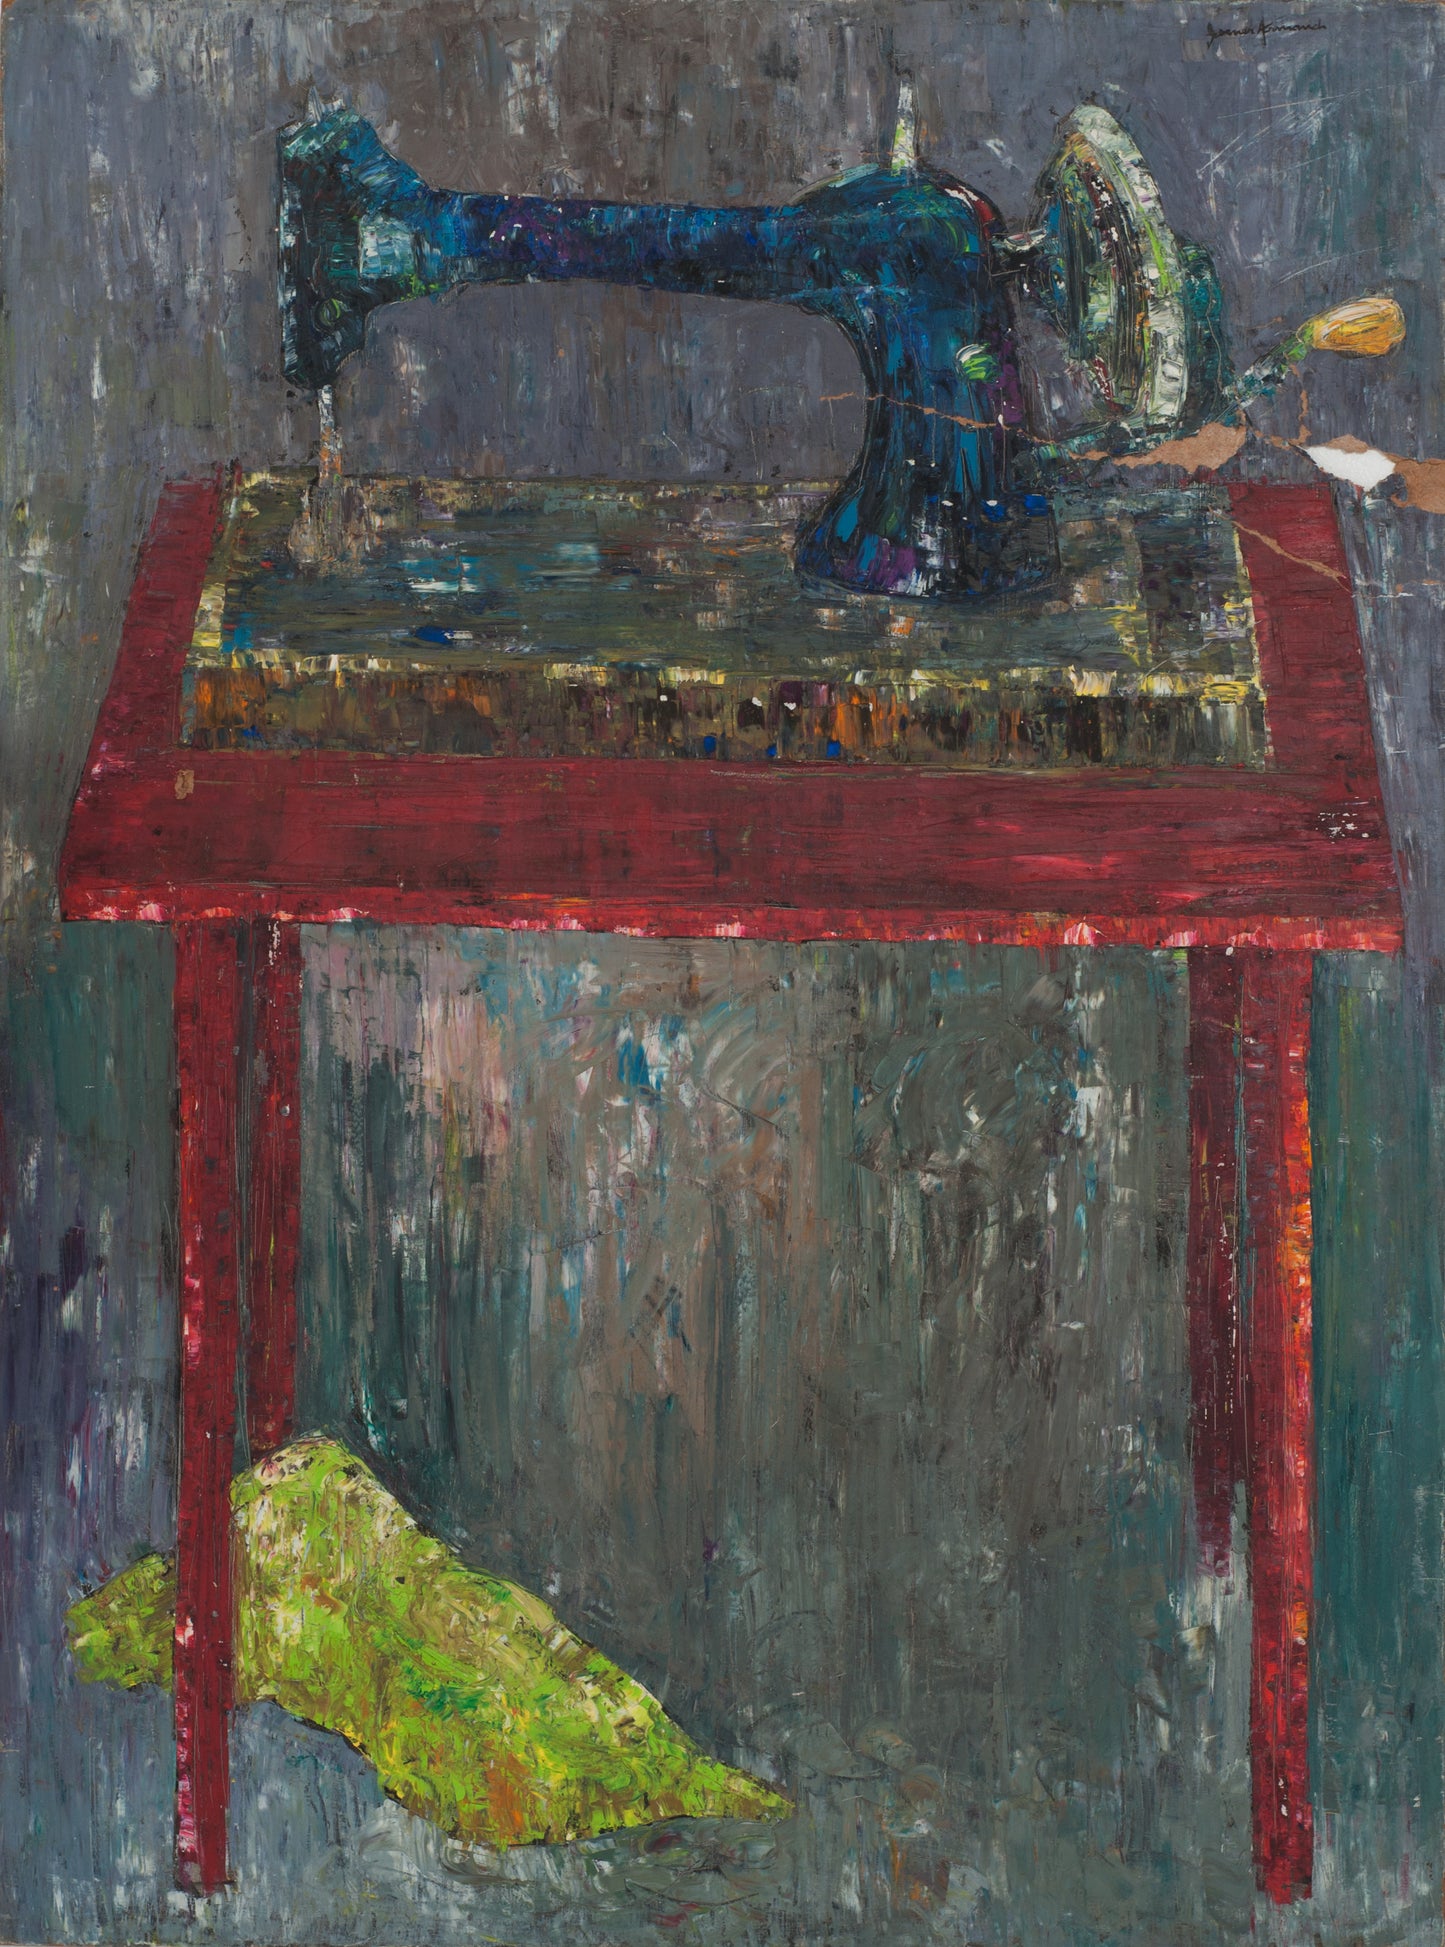 Gesner Armand (1936-2008) 17 ½" x 23 ½" Goat on a Chair 1977 Oil Painting #2-3-96GSN-Fondation Marie & Georges S. Nader